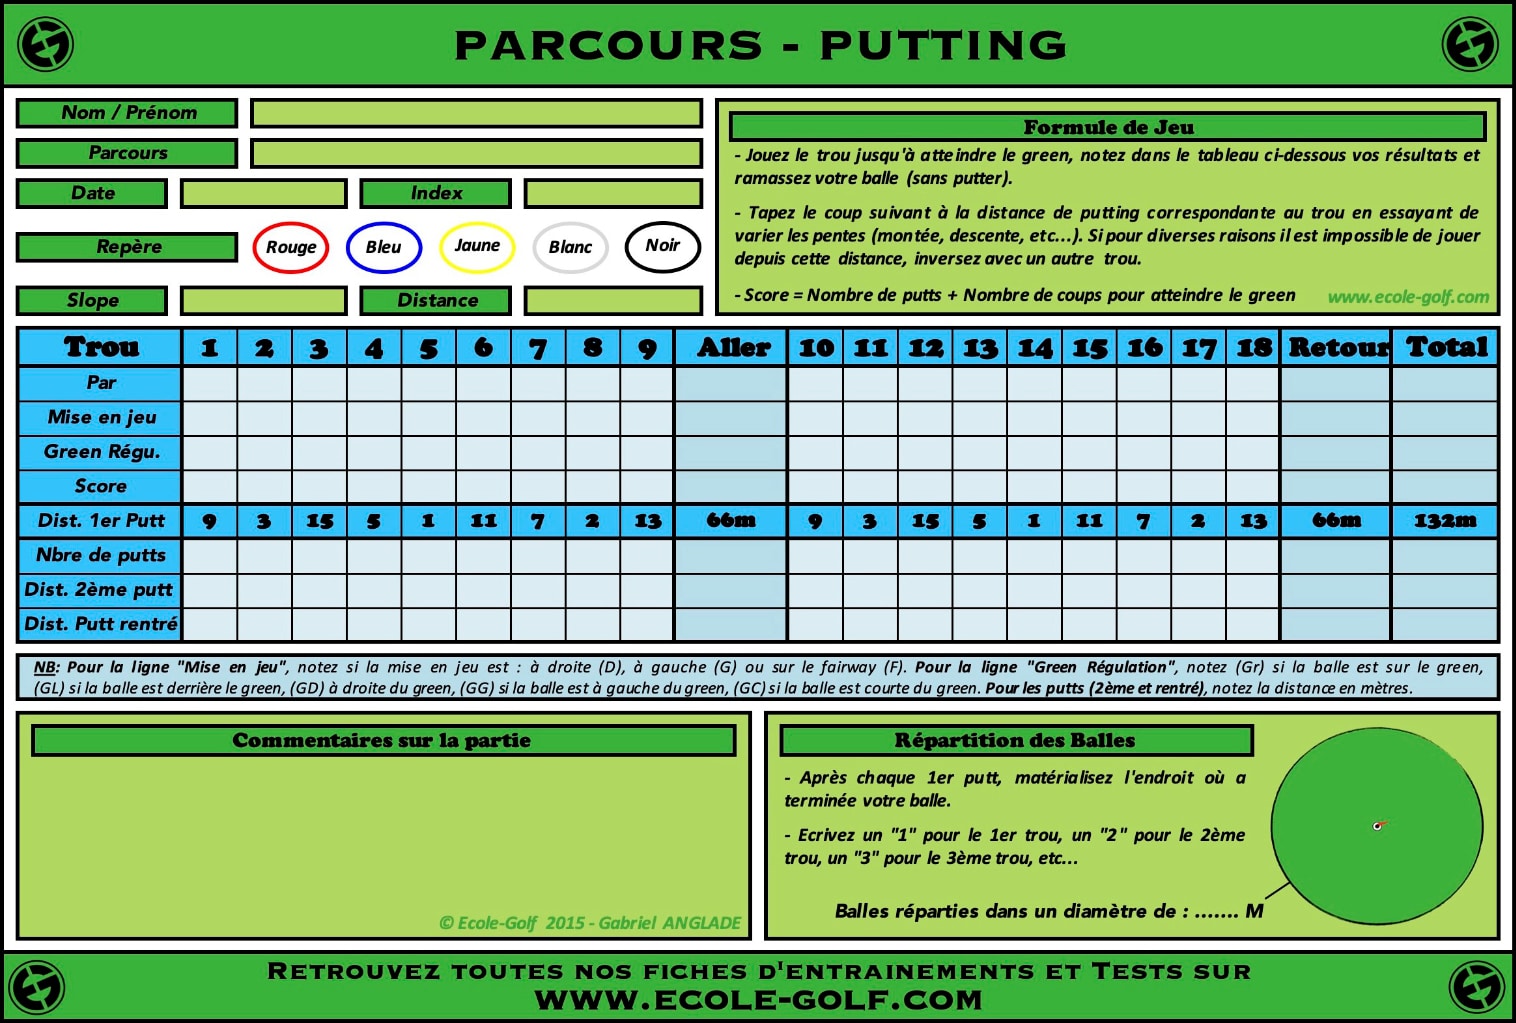 Parcours - Putting